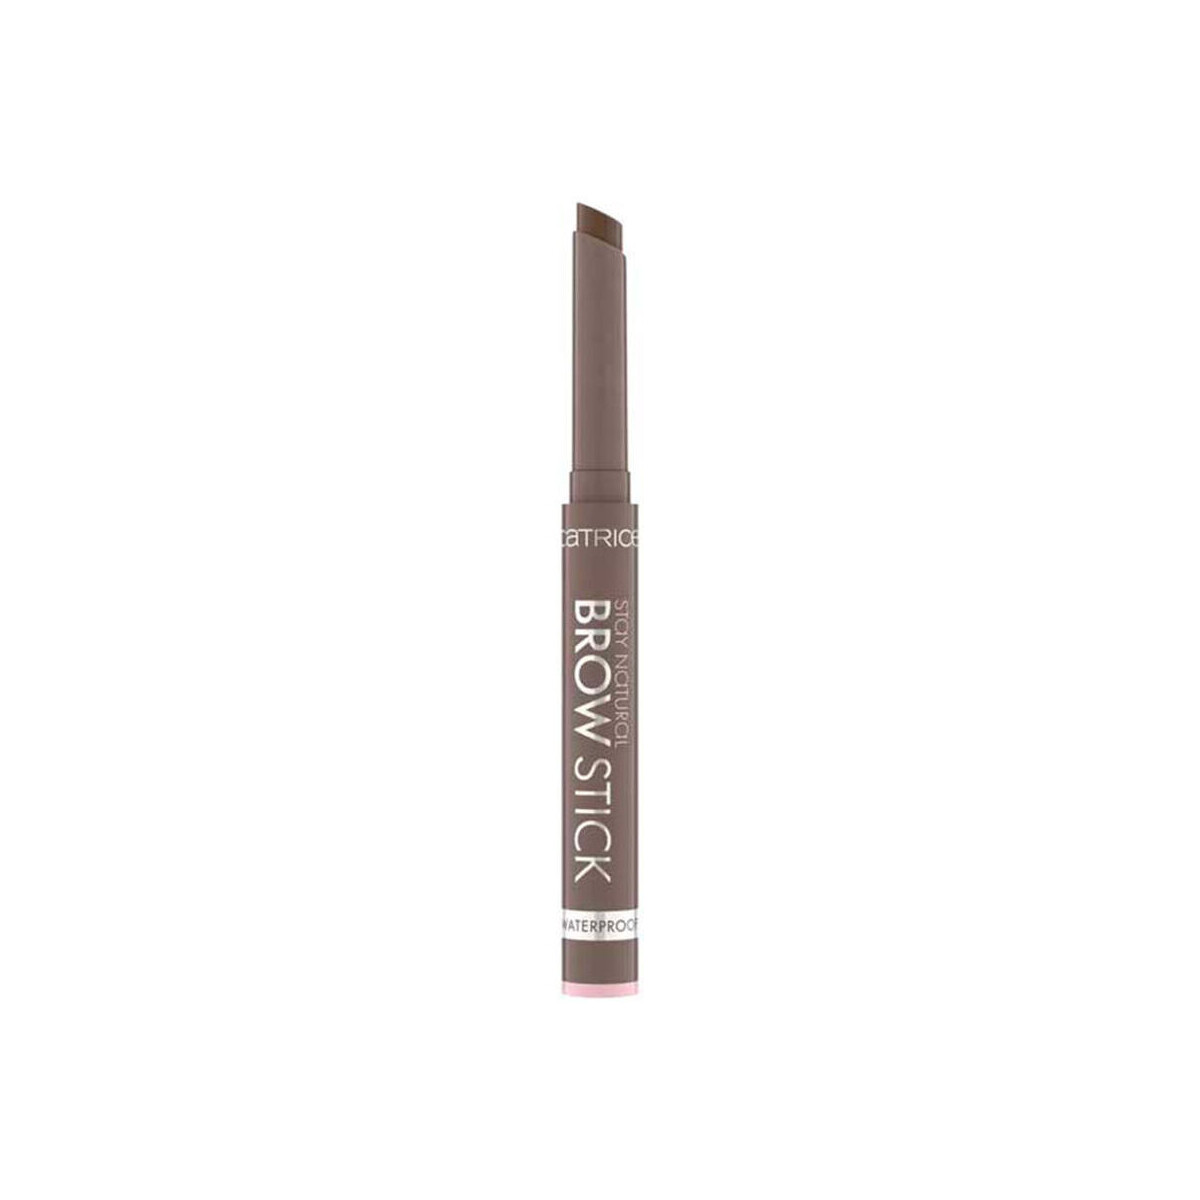 Belleza Mujer Perfiladores cejas Catrice Brow Stick Stay Natural 030-soft Dark Brown 1 Gr 